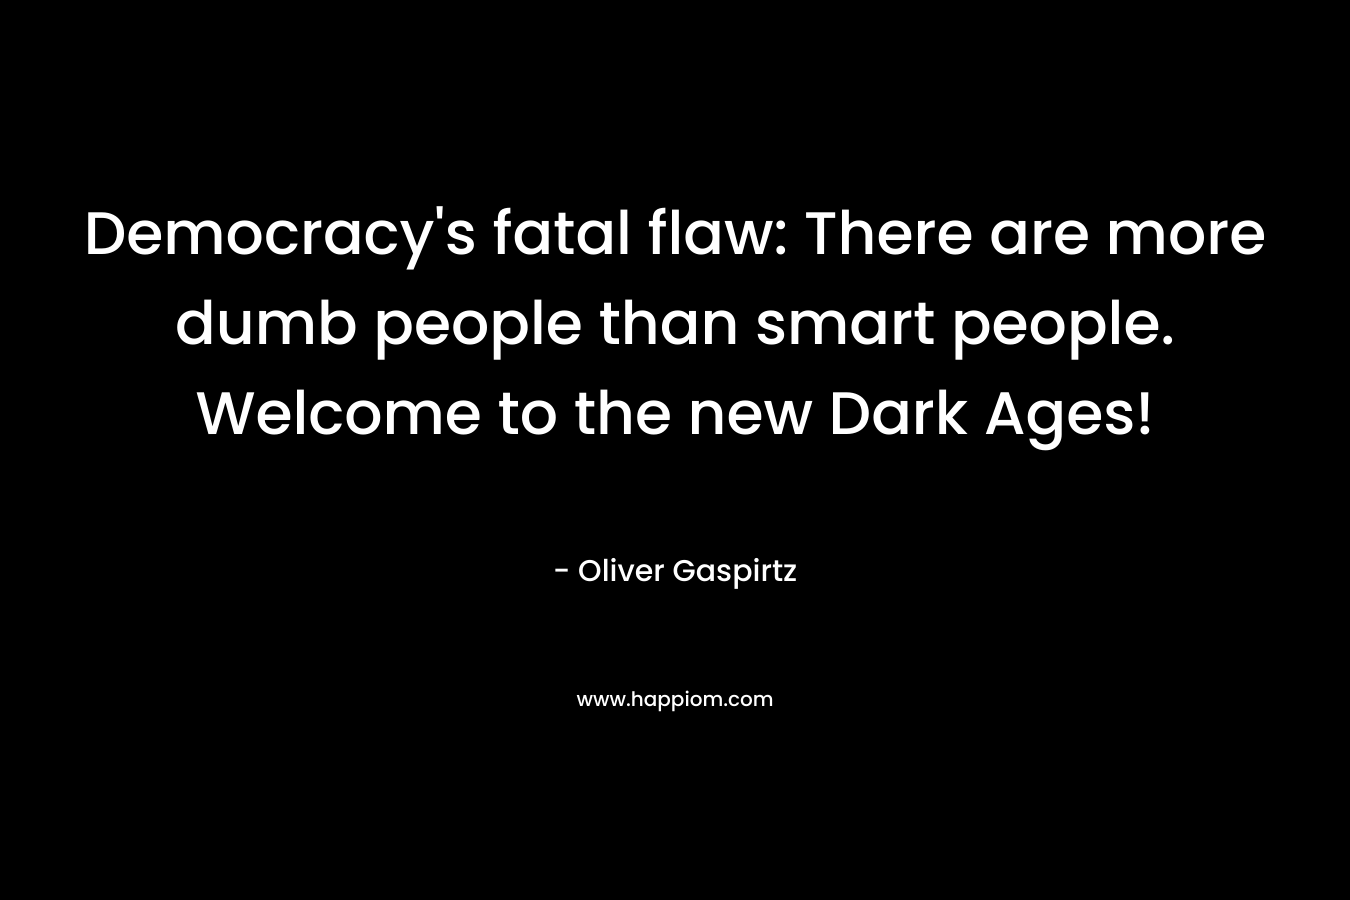 Democracy's fatal flaw: There are more dumb people than smart people. Welcome to the new Dark Ages!